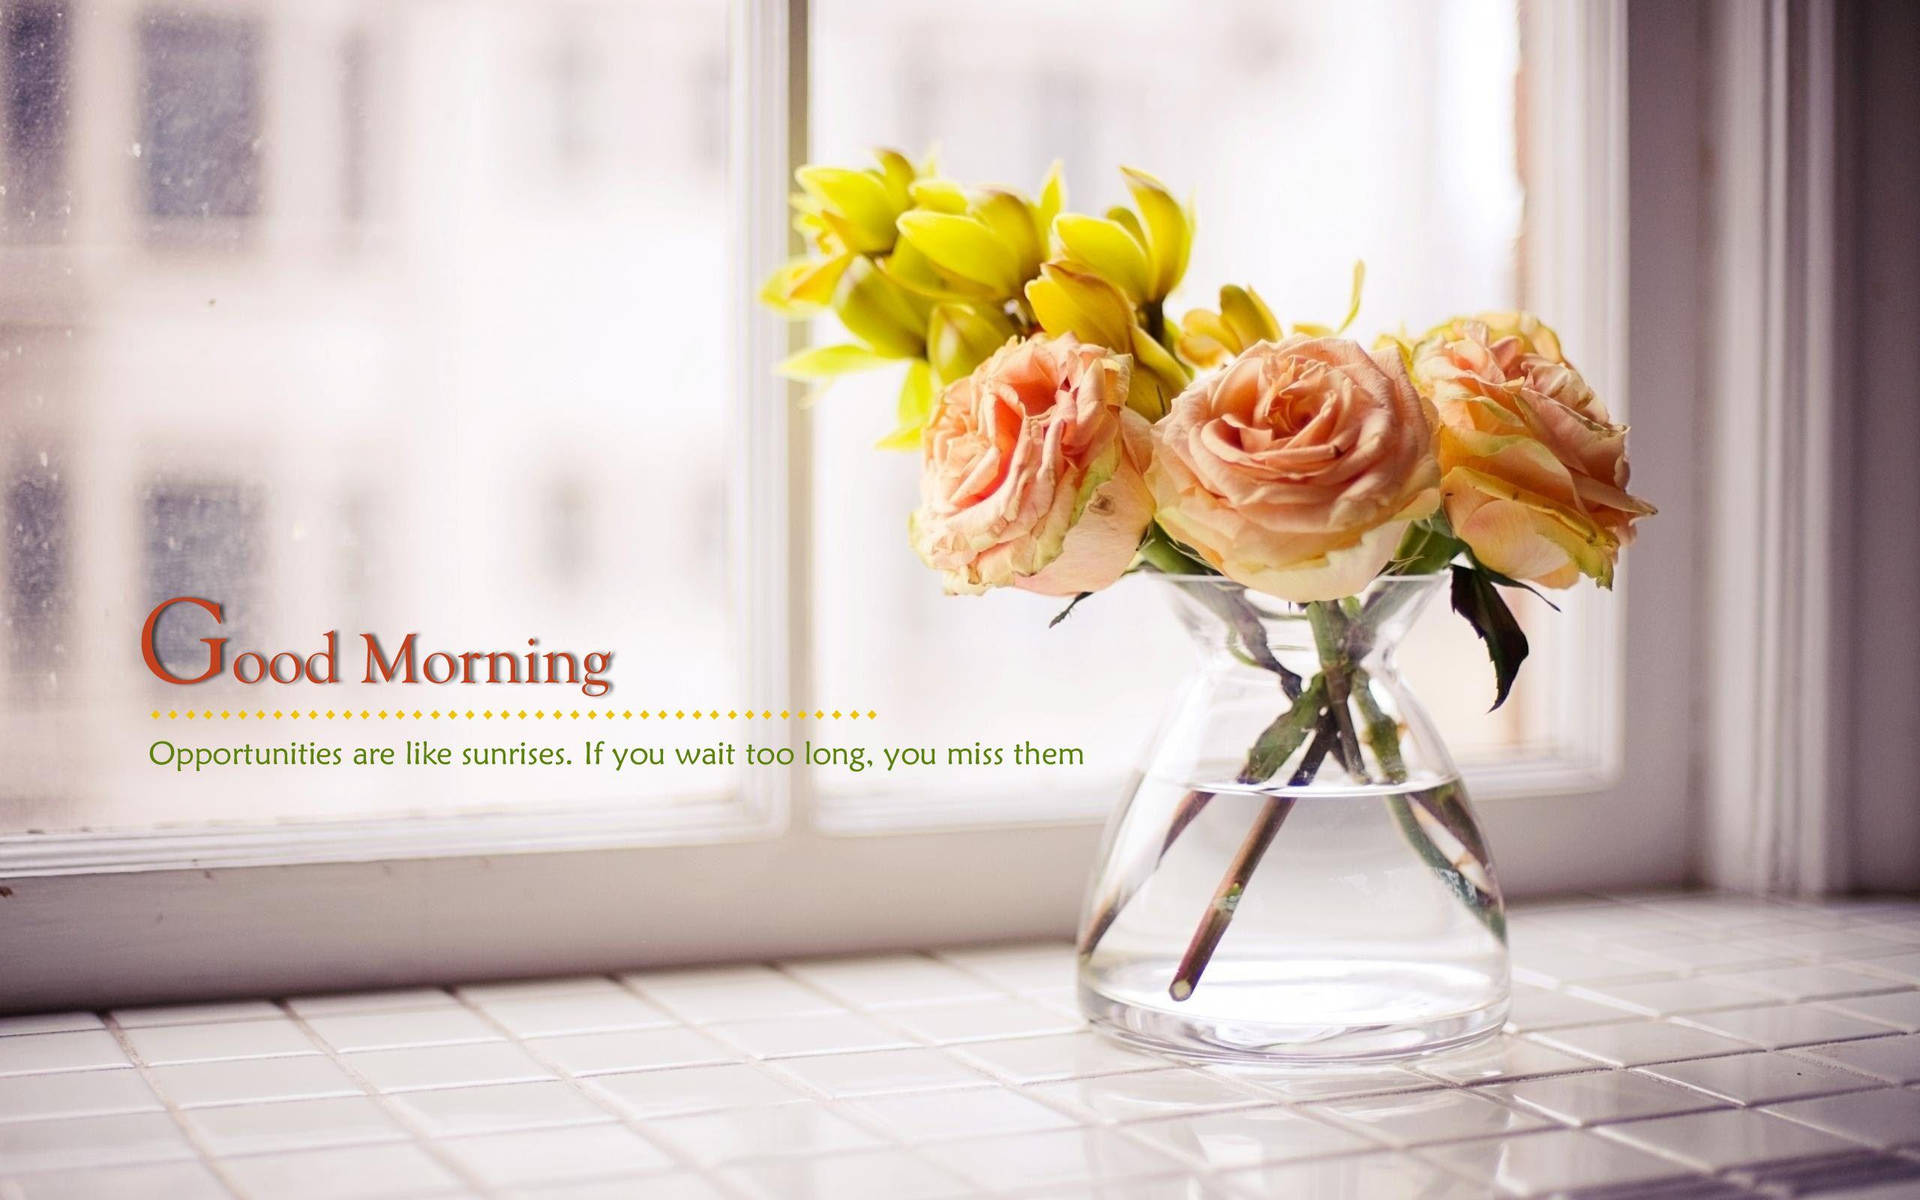 Good Morning Hd With Flower Bouquet Background